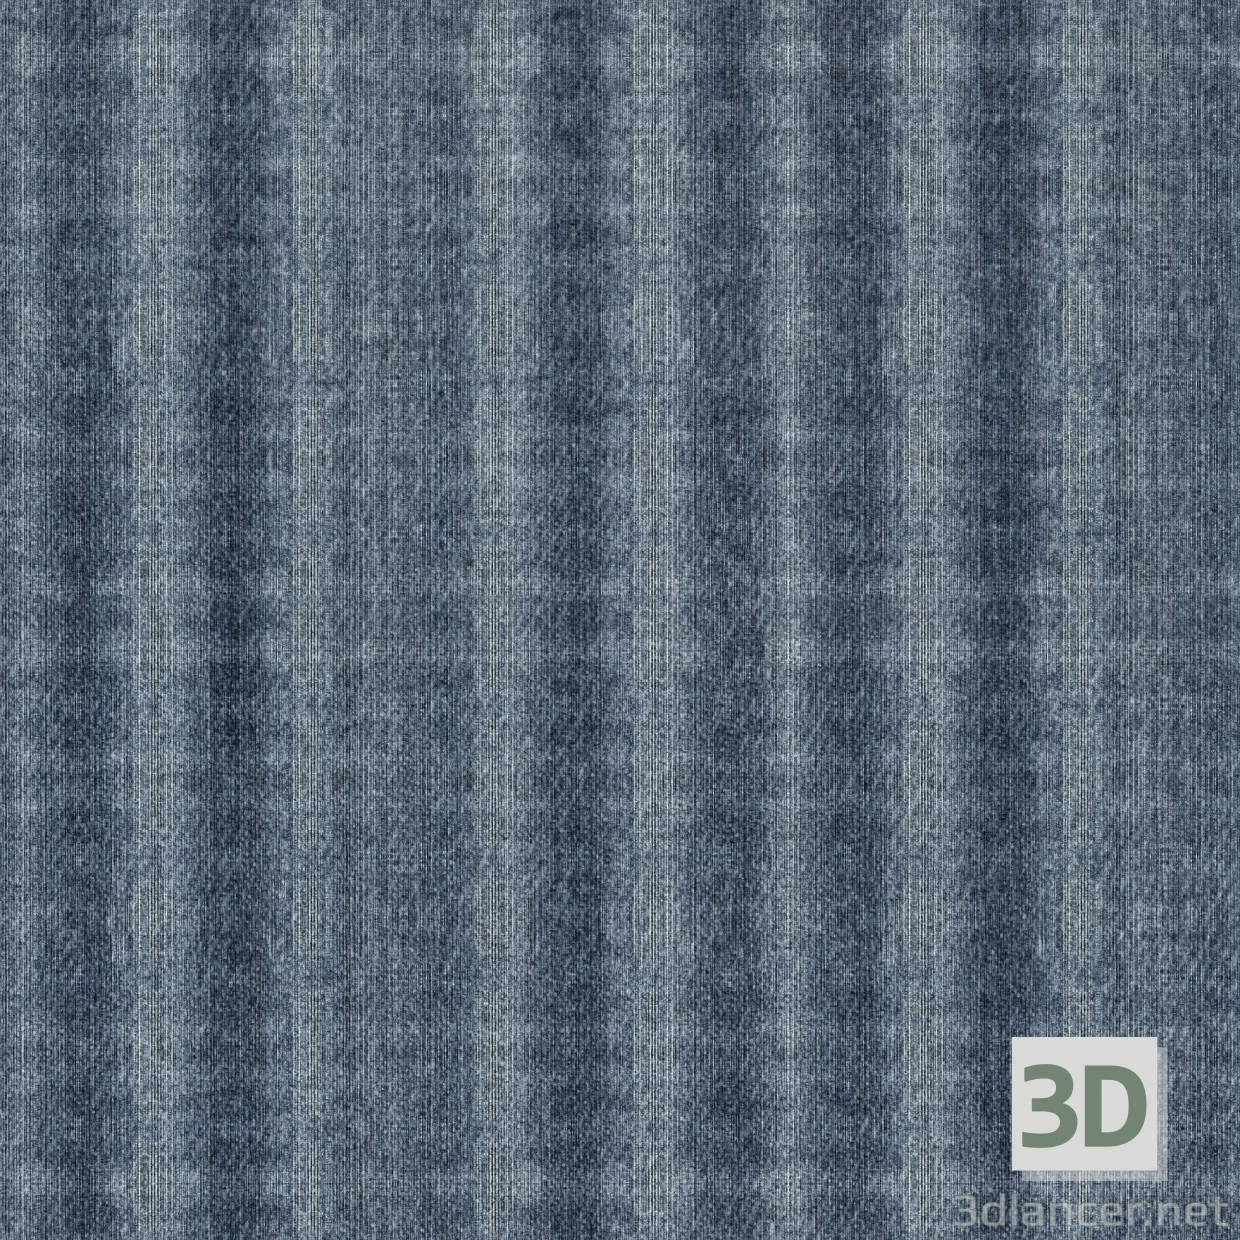 Texture Wool free download - image